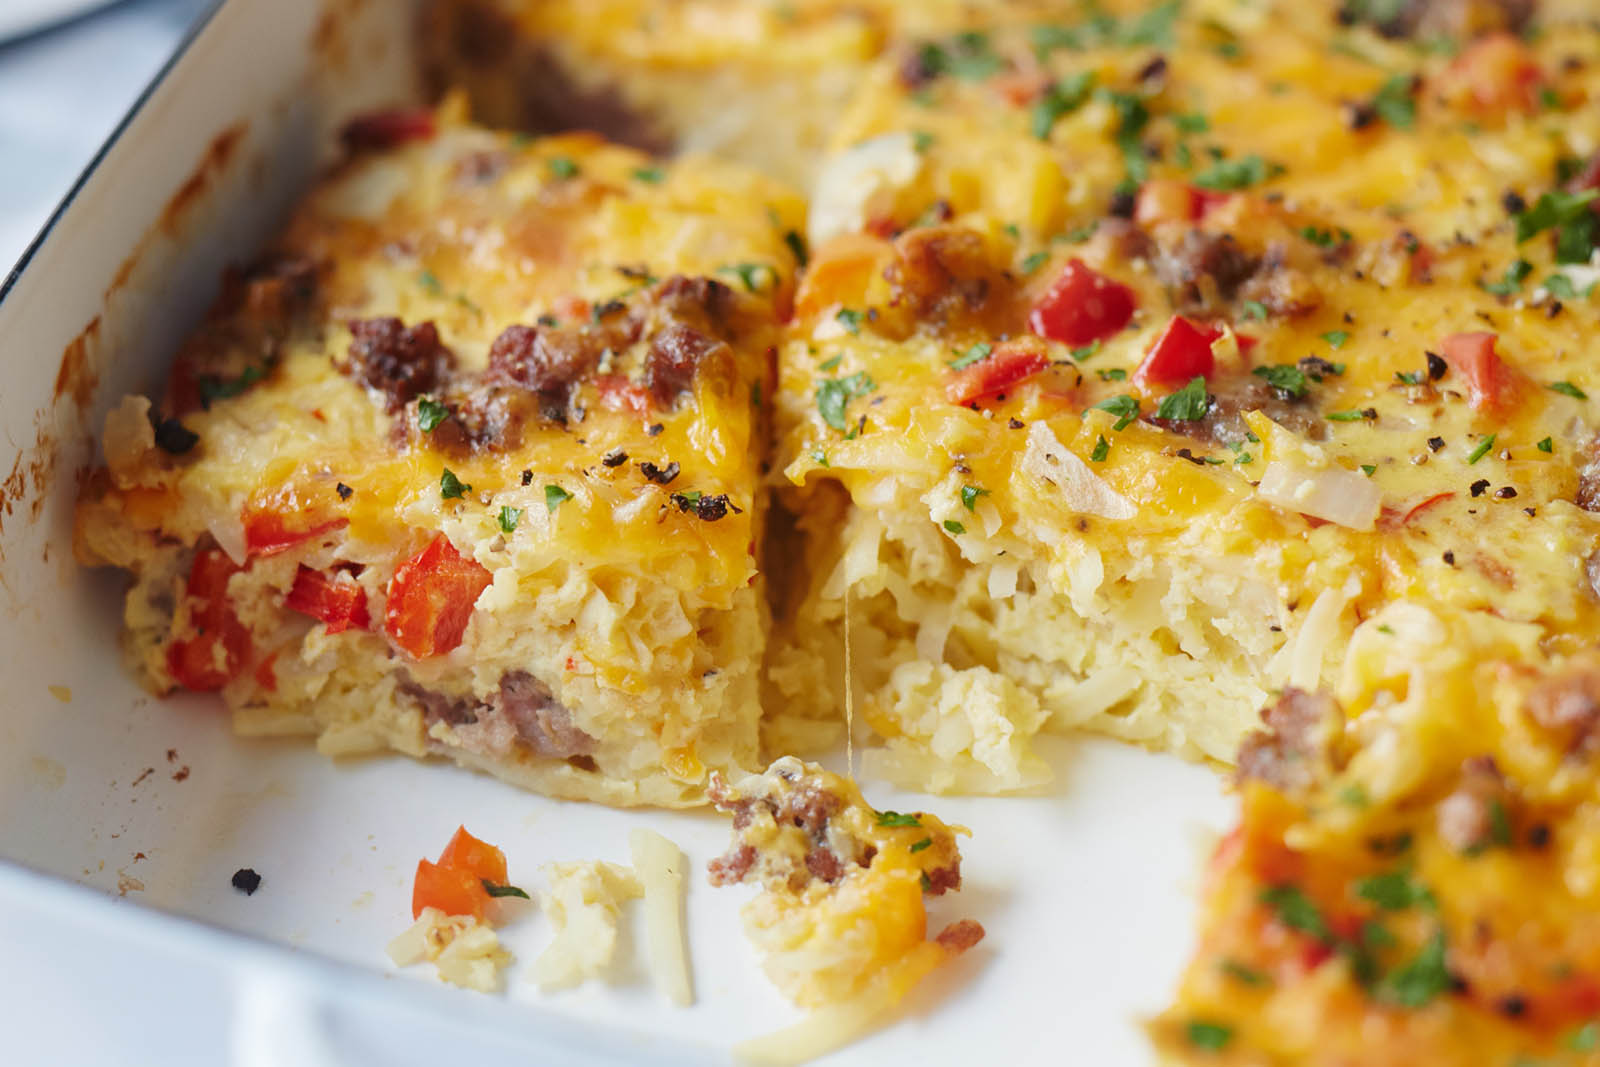 🥞 Sorry, Only Real Foodies Have Eaten at Least 17/24 of These Delicious Brunch Foods Breakfast Casserole